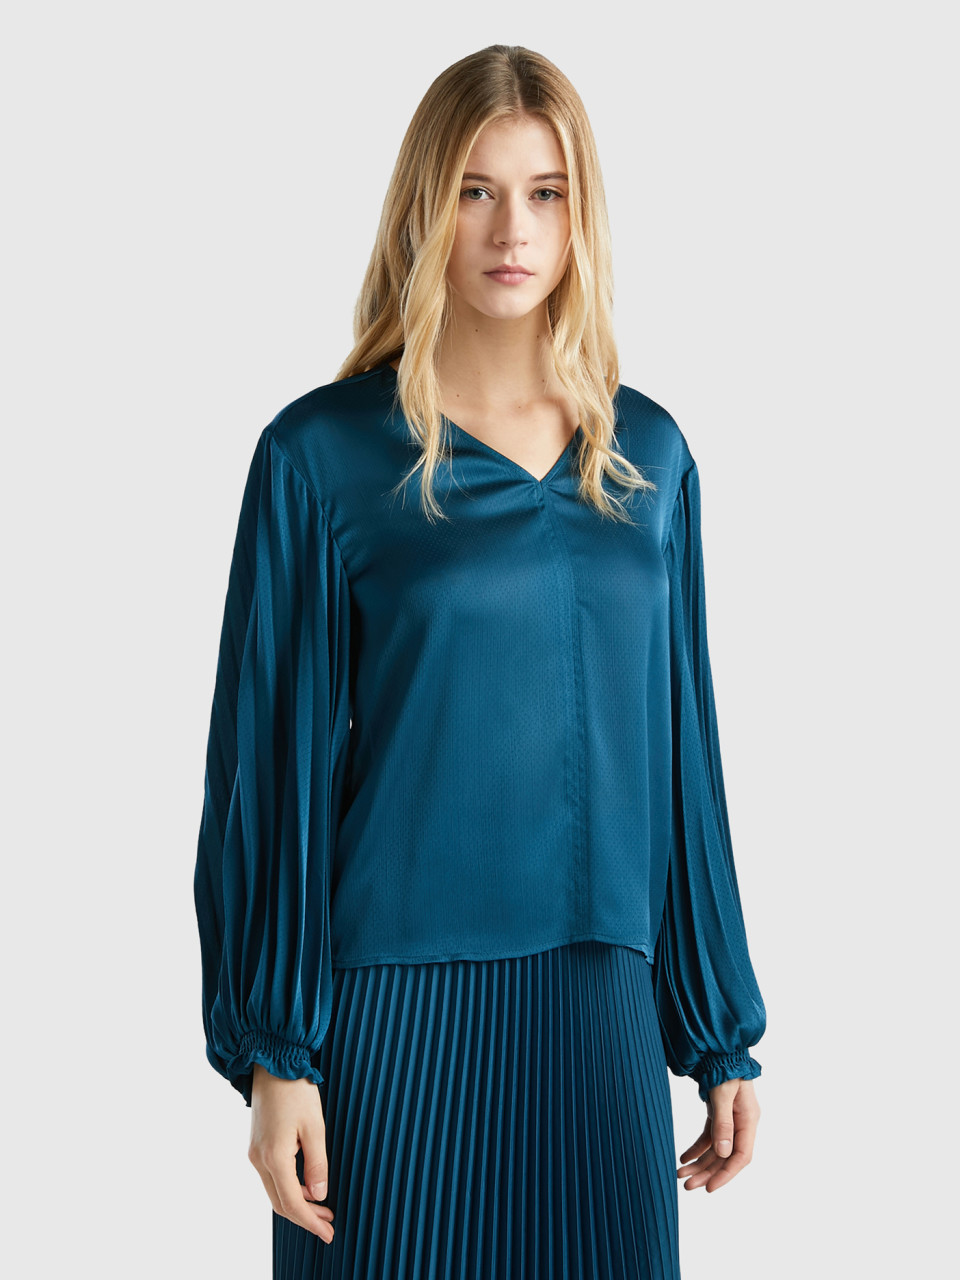 Benetton, Blouse With Long Pleated Sleeves, Teal, Women